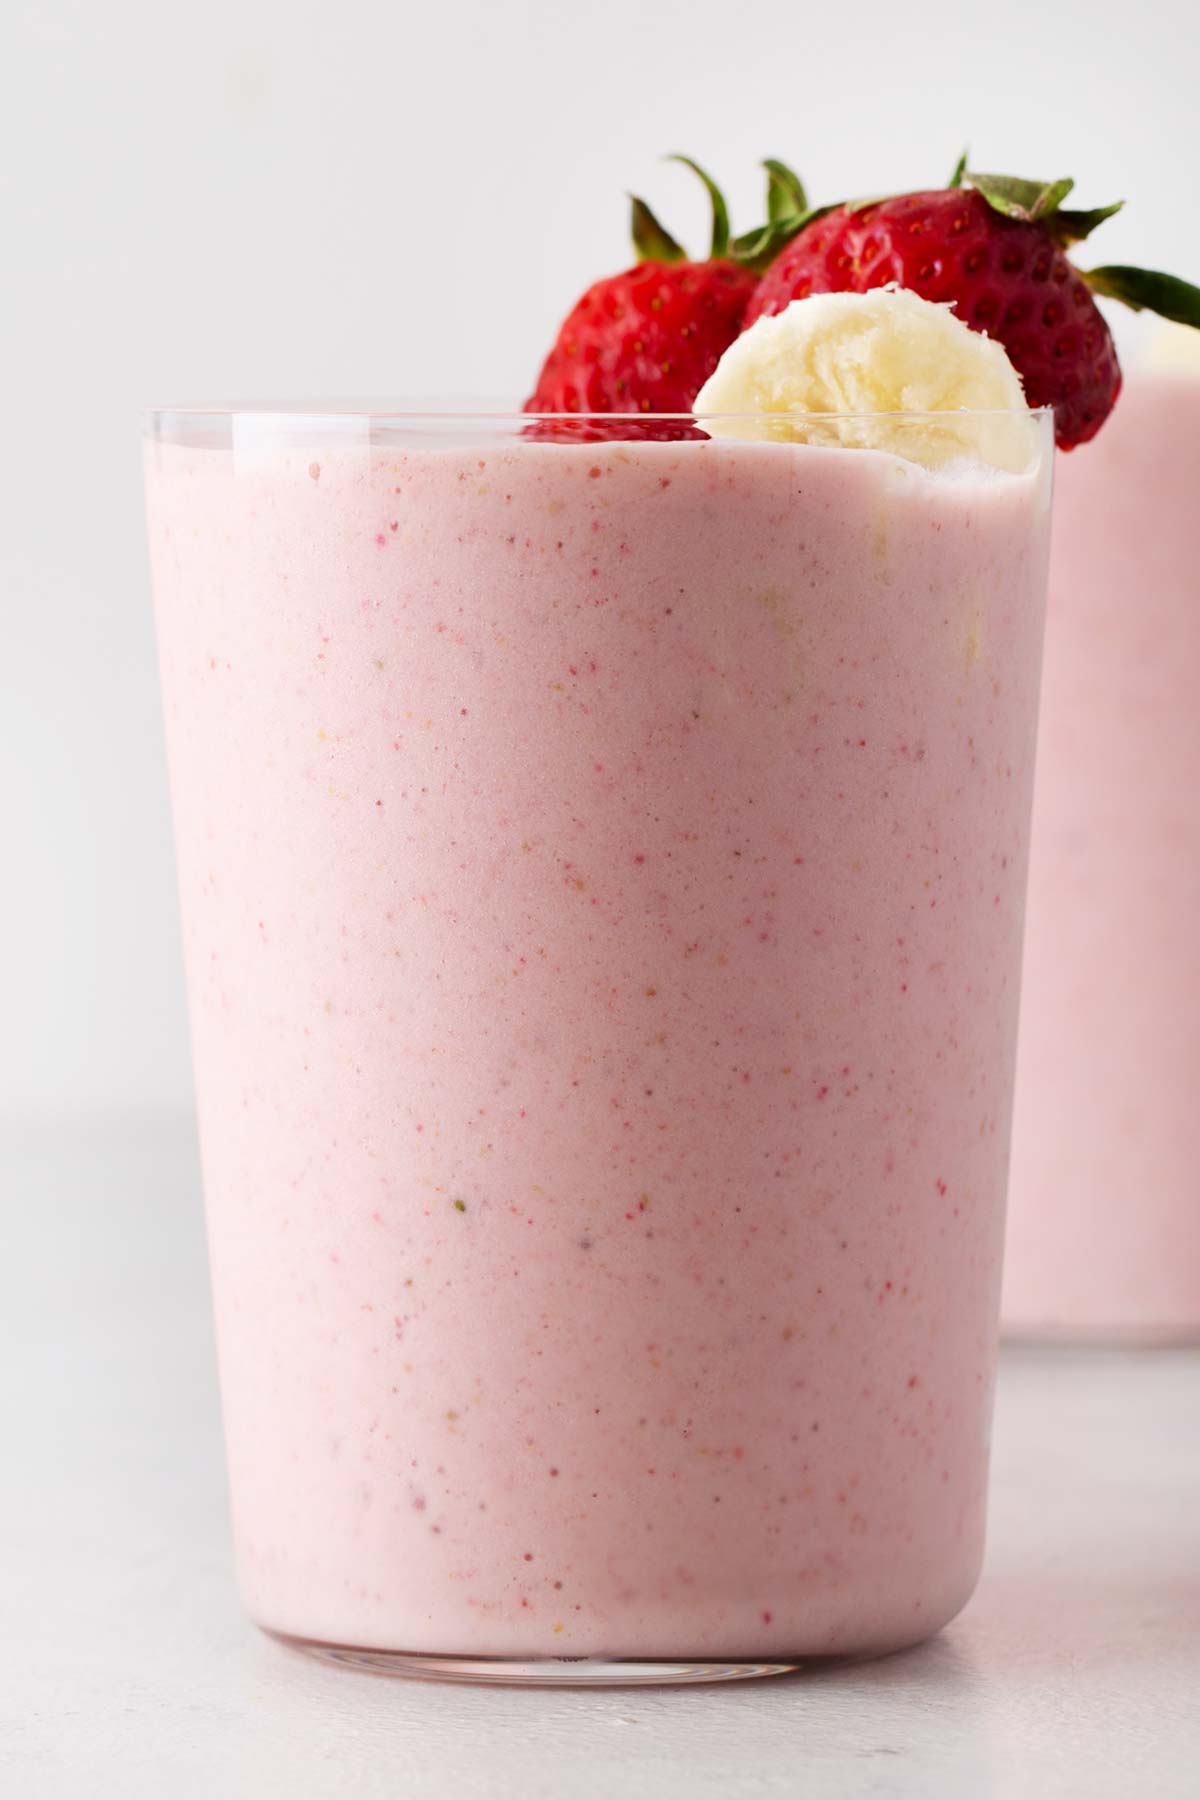 Strawberry banana smoothie in a cup.